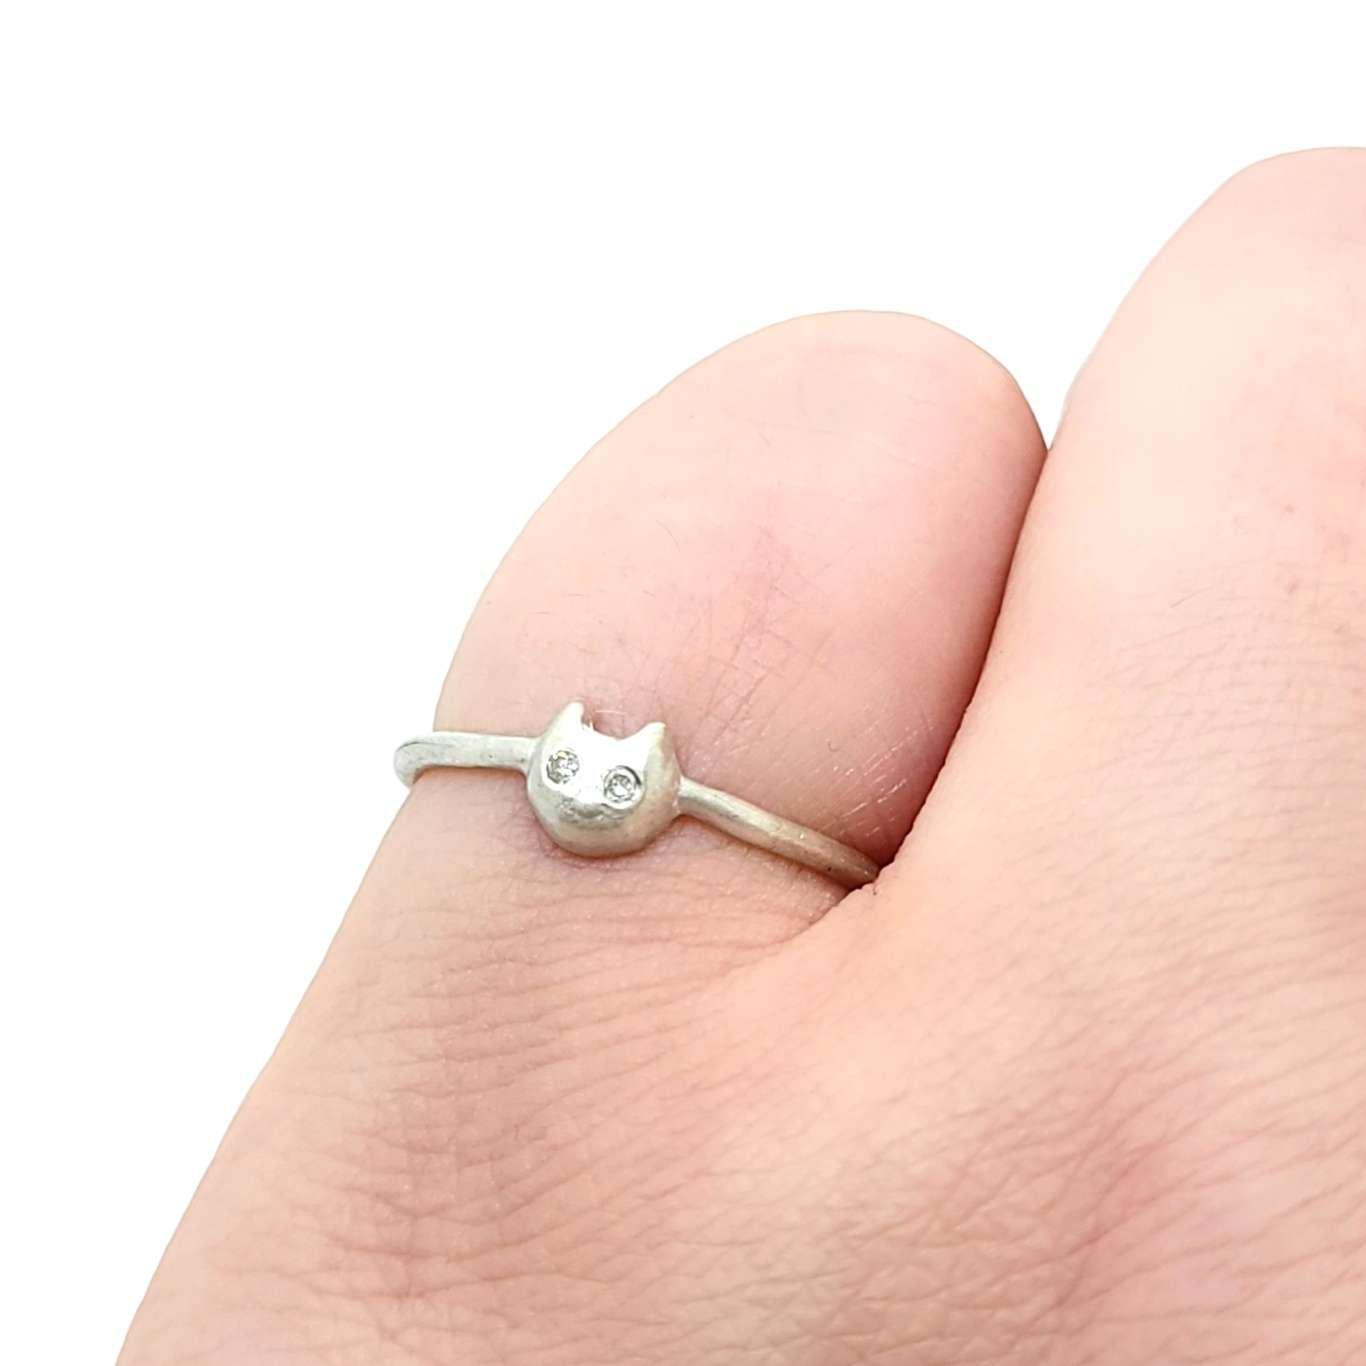 Ring - Diamond-Eyed Tiny Kitten Face in Sterling Silver by Michelle Chang